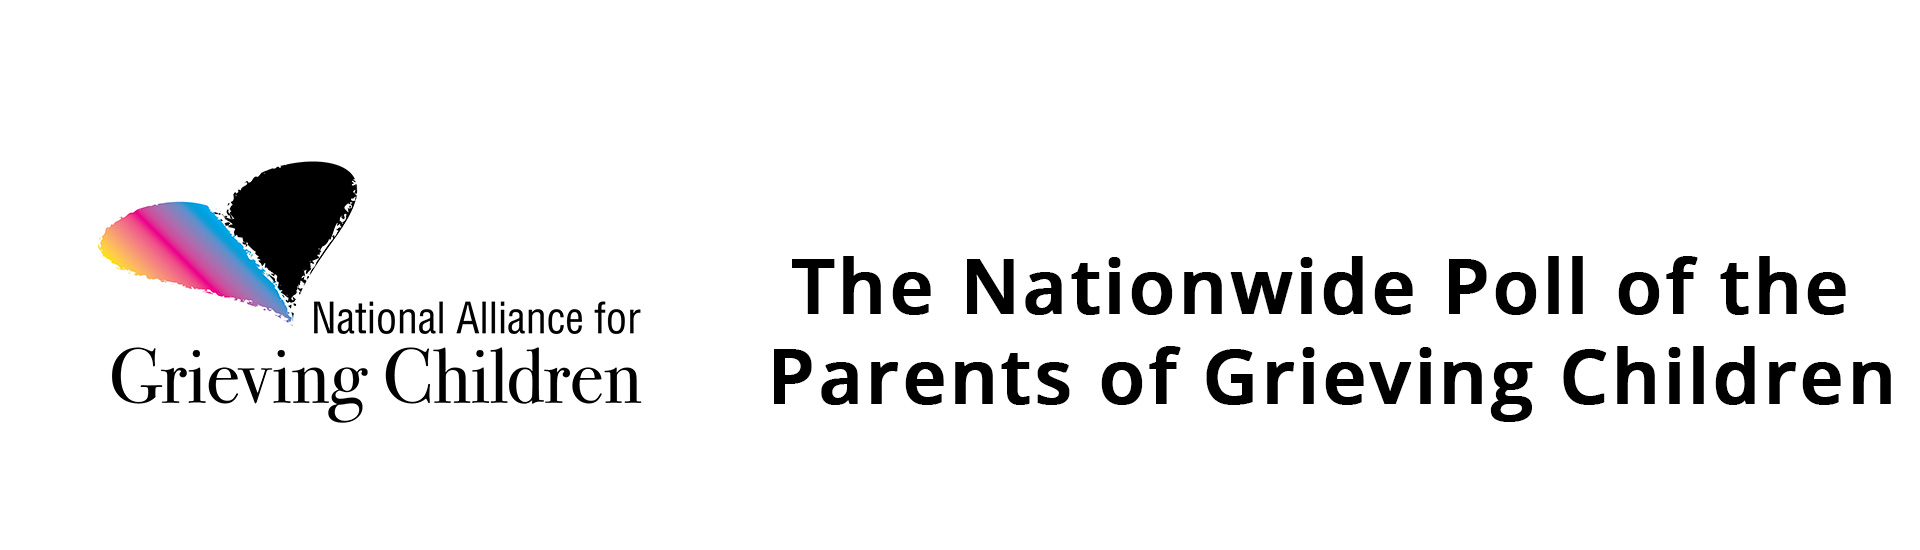 national poll of the parents of grieving children